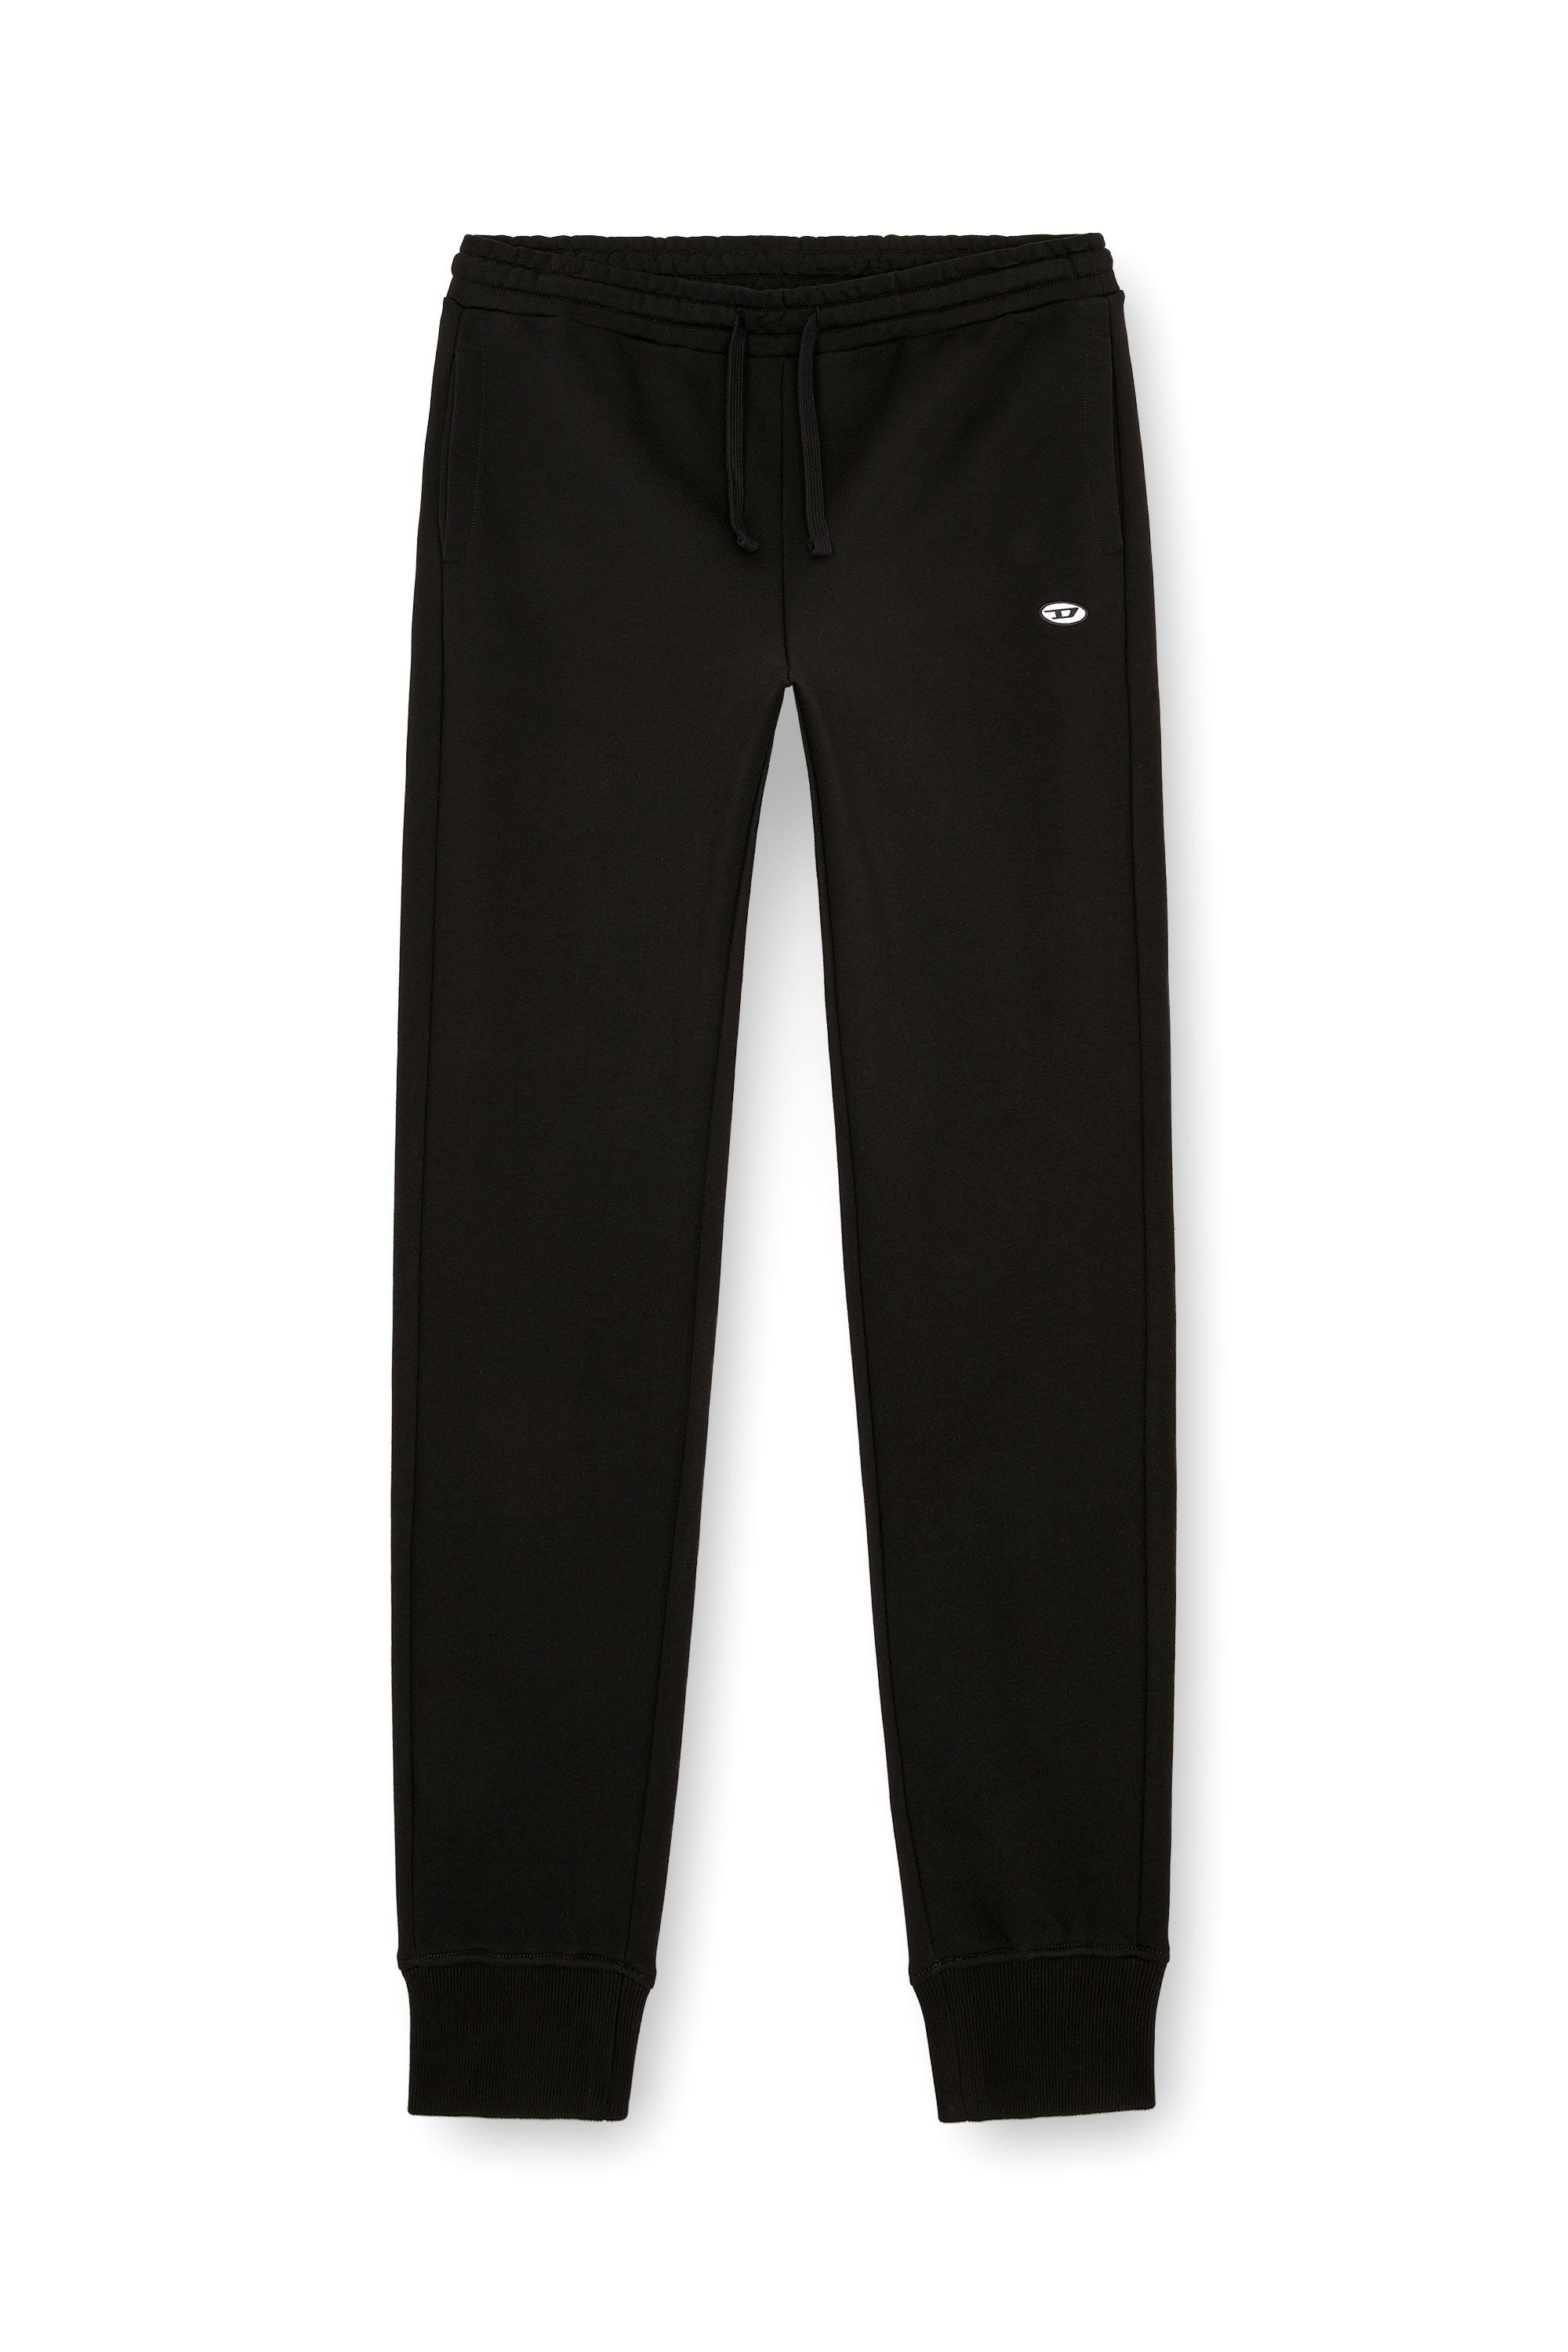 Diesel - P-TARY-DOVAL-PJ, Hombre Pantalones deportivos con parche Oval D in Negro - Image 4